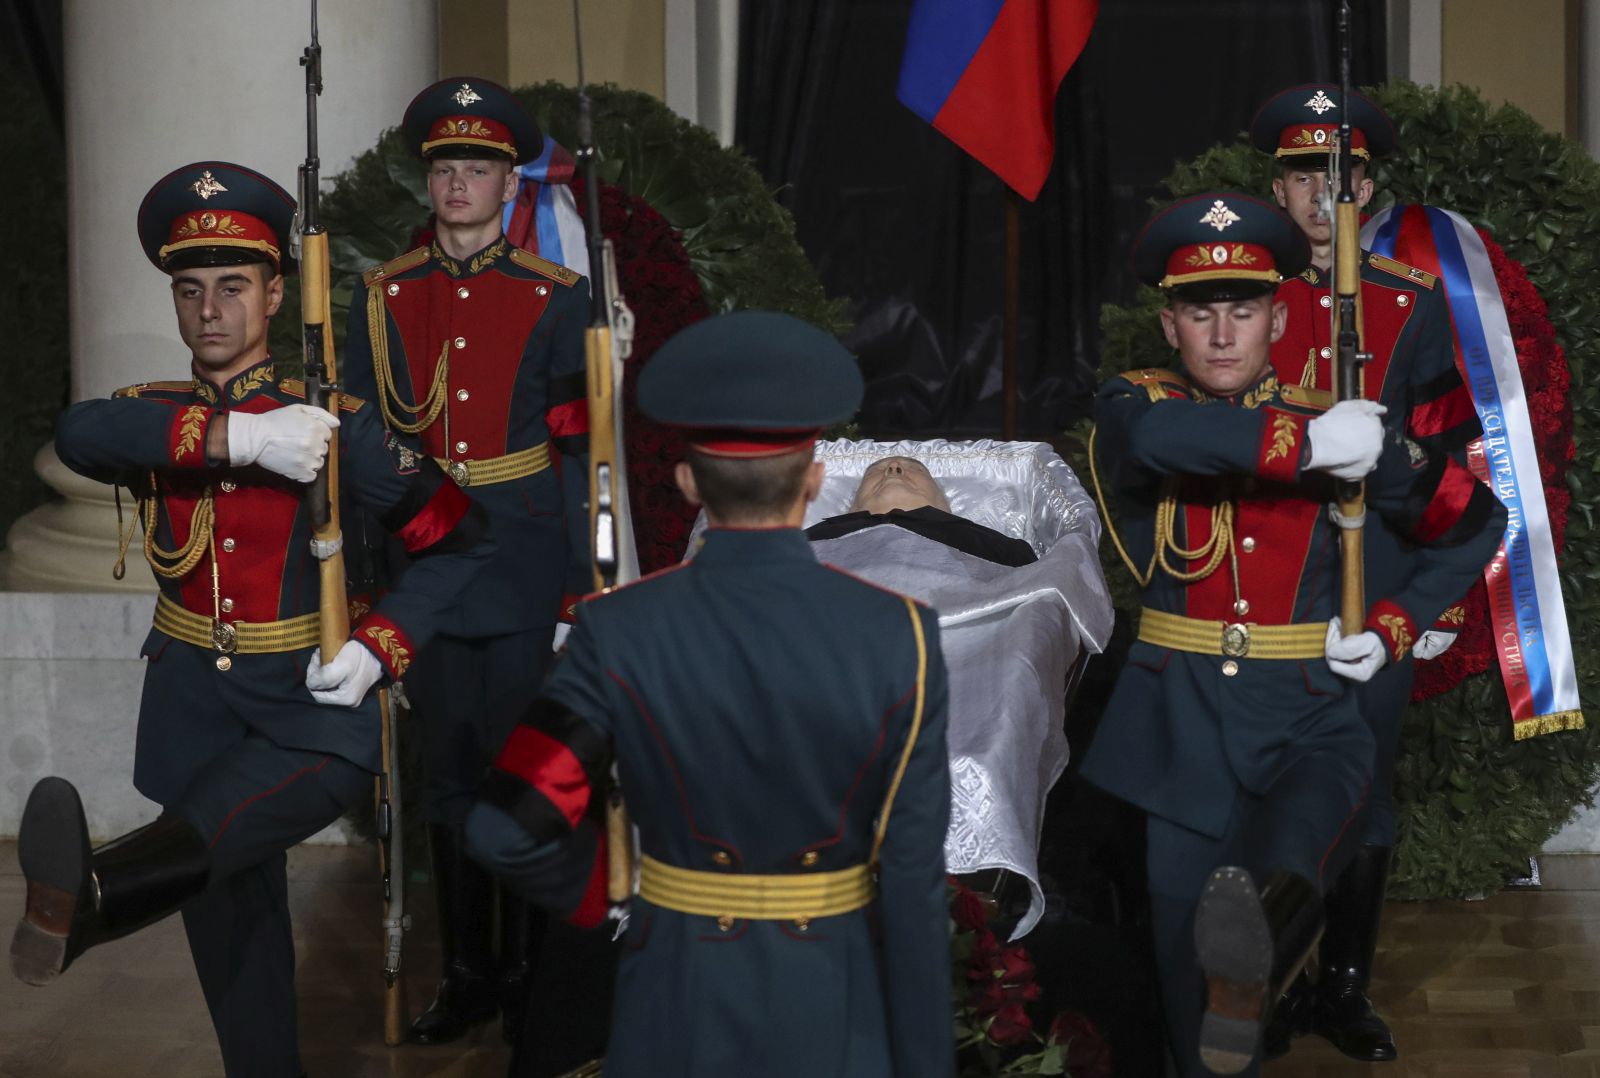 epa10156444 Russian honour guards stand near the coffin with the body of the late former Soviet president Mikhail Gorbachev, during farewell ceremony at the Hall of Columns of the House of Trade Unions in Moscow, Russia, 03 September 2022. Former Soviet leader Mikhail Gorbachev died on 30 August 2022 at the age of 91 in Moscow Central Clinical Hospital. Gorbachev initiated numerous reforms during his tenure. He signed a nuclear arms treaty with the United States and withdrew the Soviet Union from the Soviet-Afghan war. His policies created freedom of speech and press, and decentralized fiscal policy planning and execution to increase efficiency. Gorbachev was the last leader of the Soviet Union, overseeing Russia transition from one party rule to a fragile democracy. Gorbachev will be buried at the Novodevichy Cemetery in Moscow next to the grave of his wife Raisa.  EPA/MAXIM SHIPENKOV